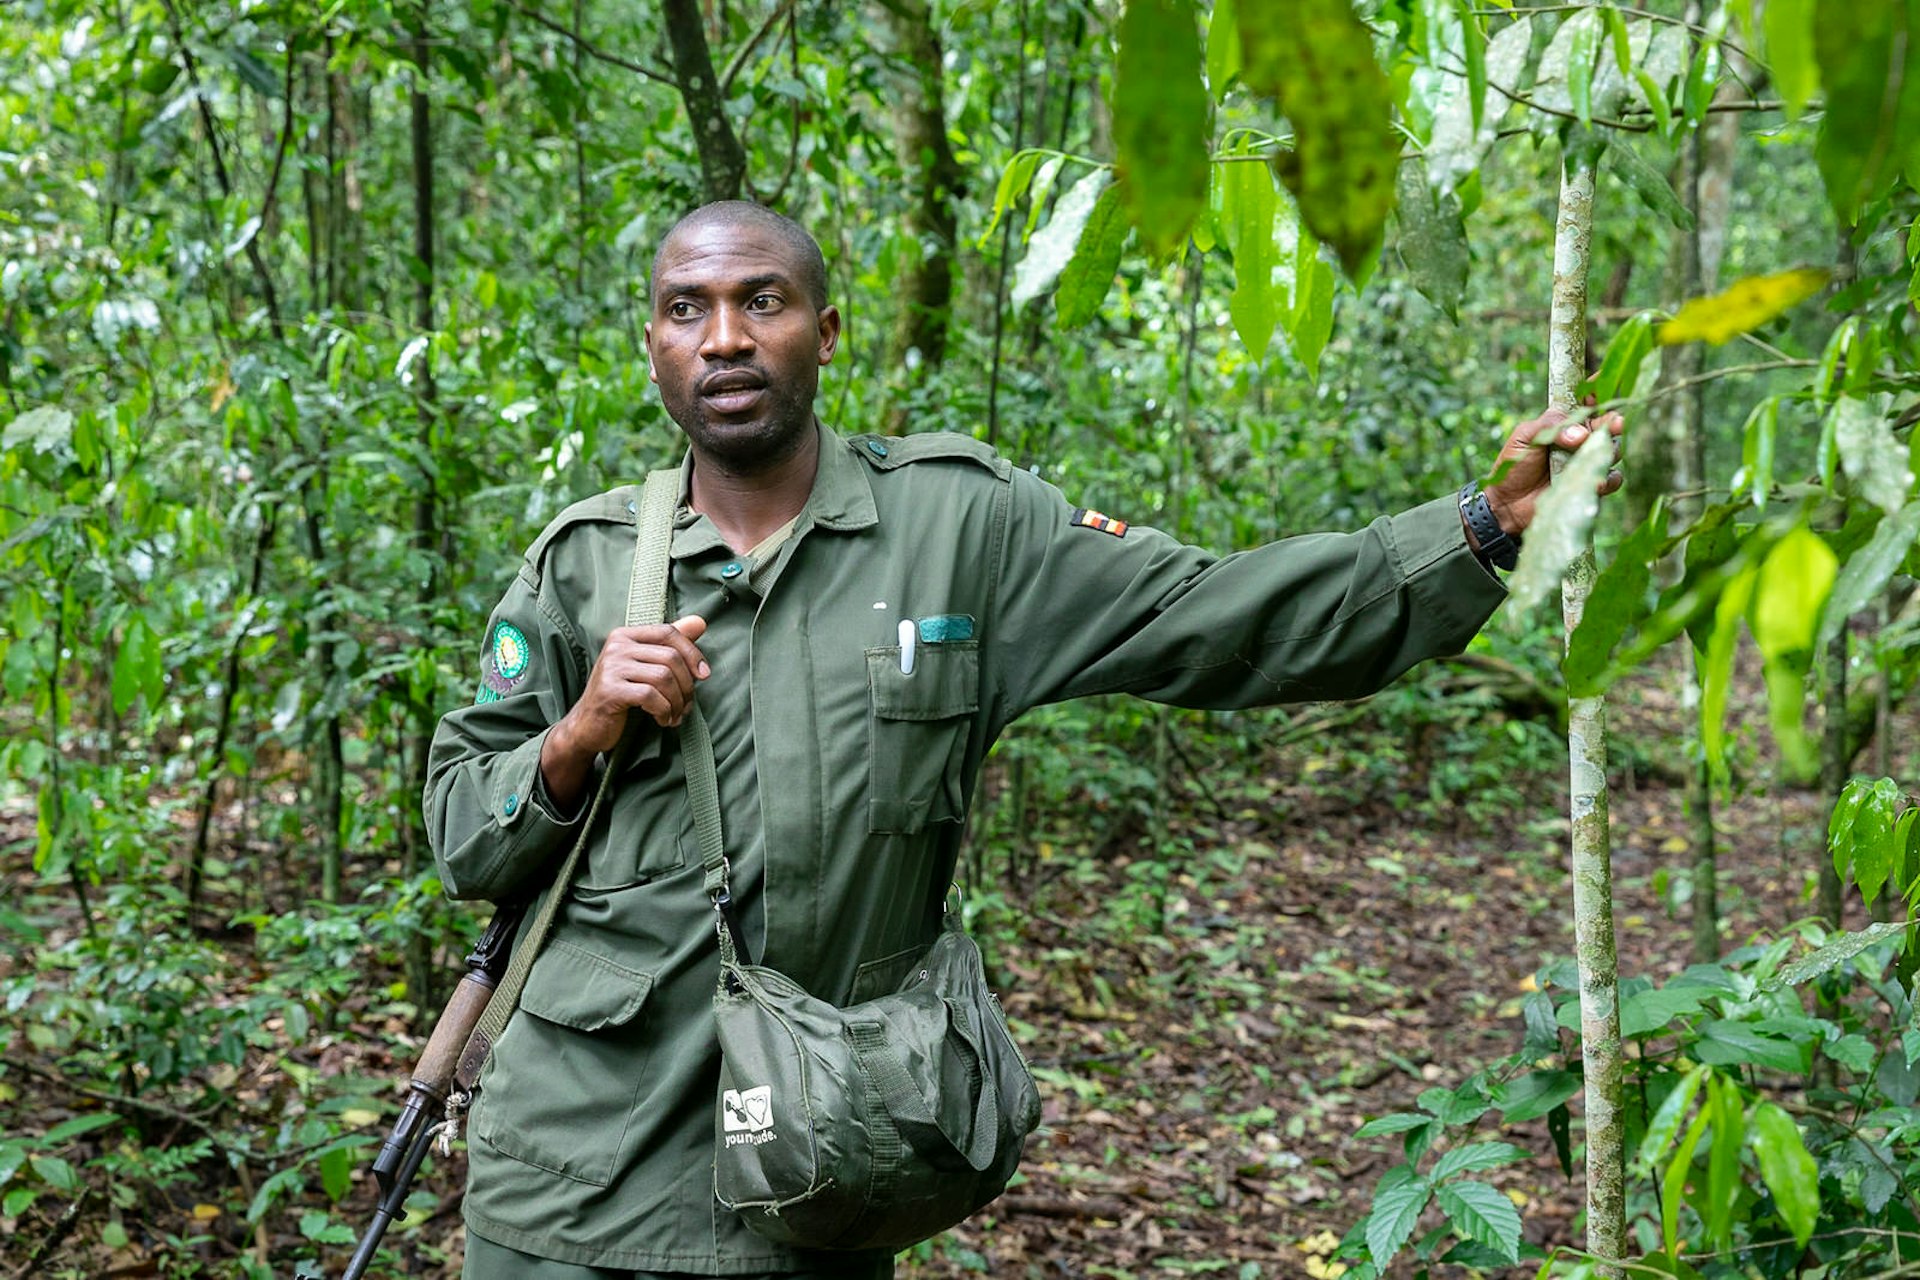 Africano, the Ugandan park guide, stands dressed in his green uniform, with one arm resting on a tree, the other holding the shoulder strap of his rifle © Bella Falk